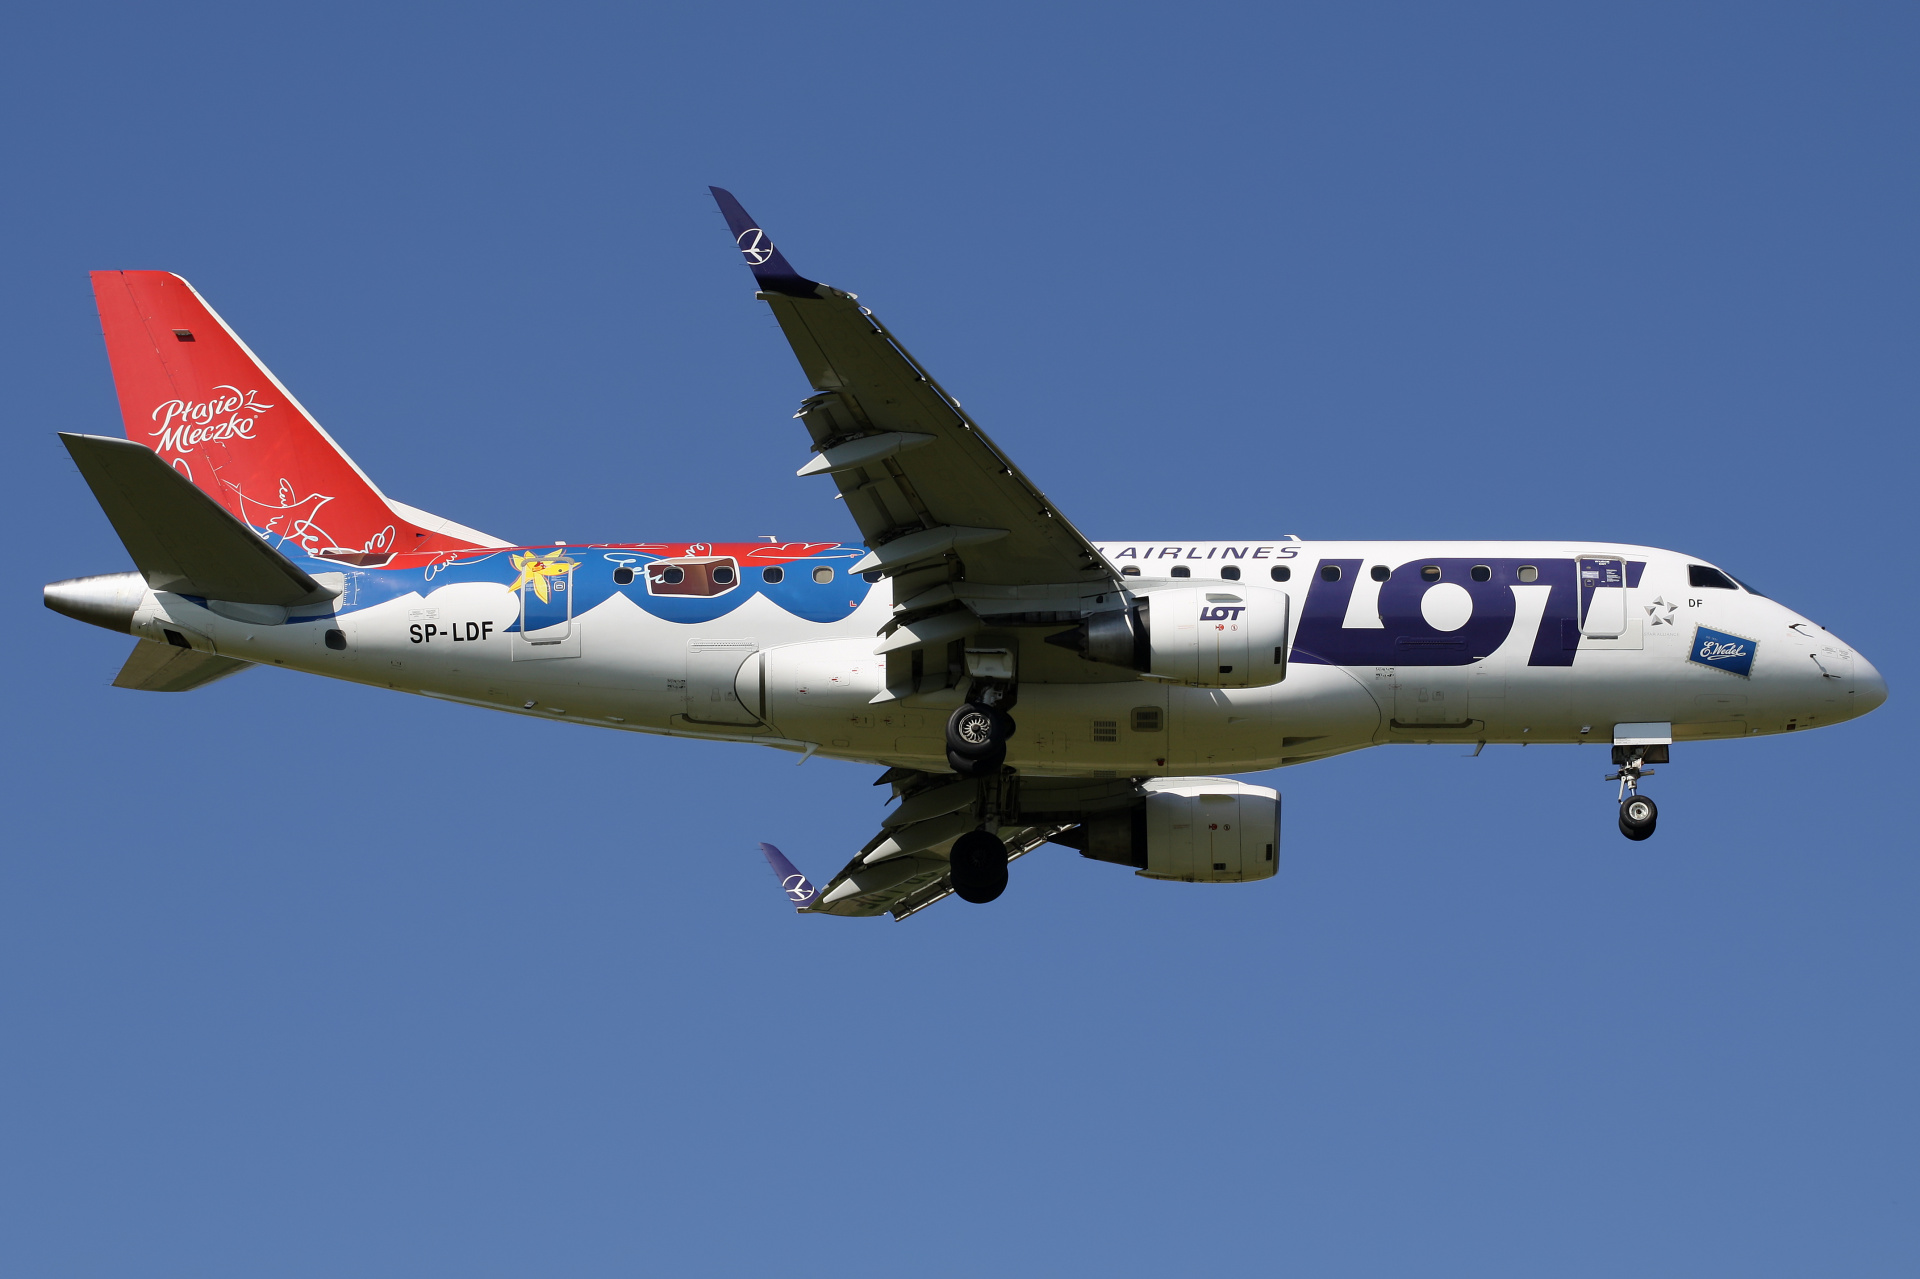 SP-LDF (Wedel Ptasie Mleczko livery) (Aircraft » EPWA Spotting » Embraer E170 » LOT Polish Airlines)